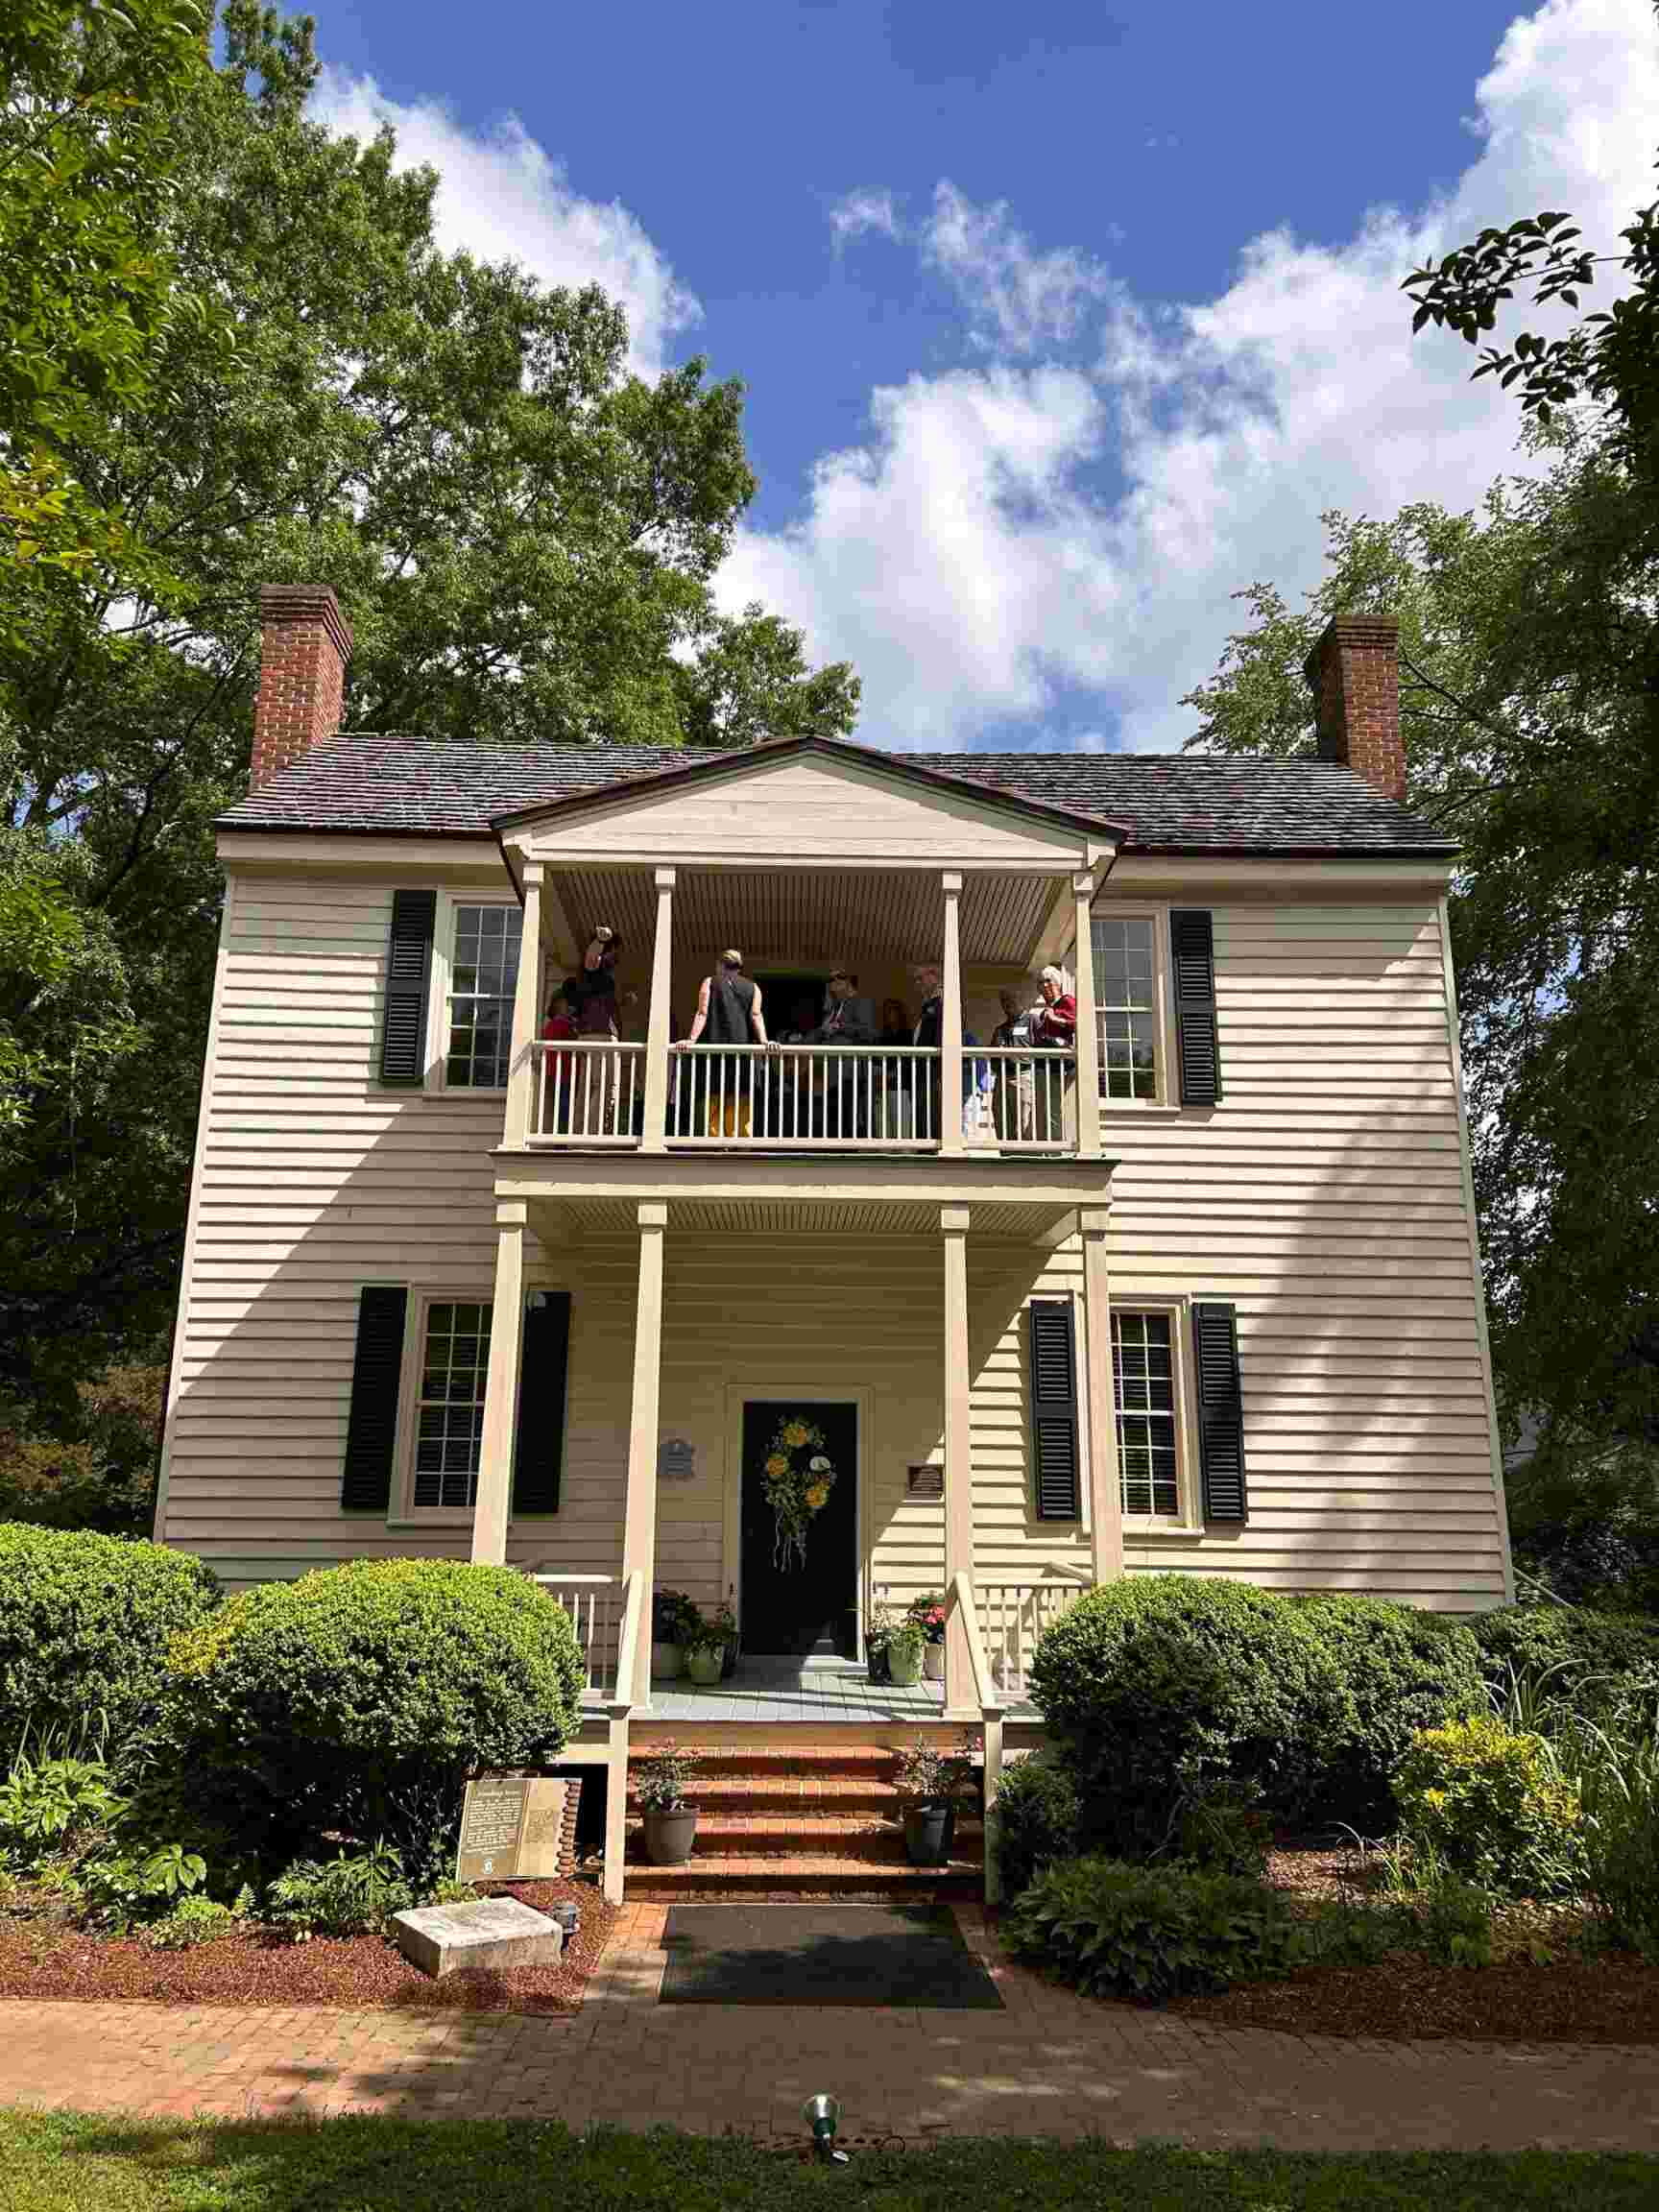 The Calvin Jones House  - things to do in wake forest